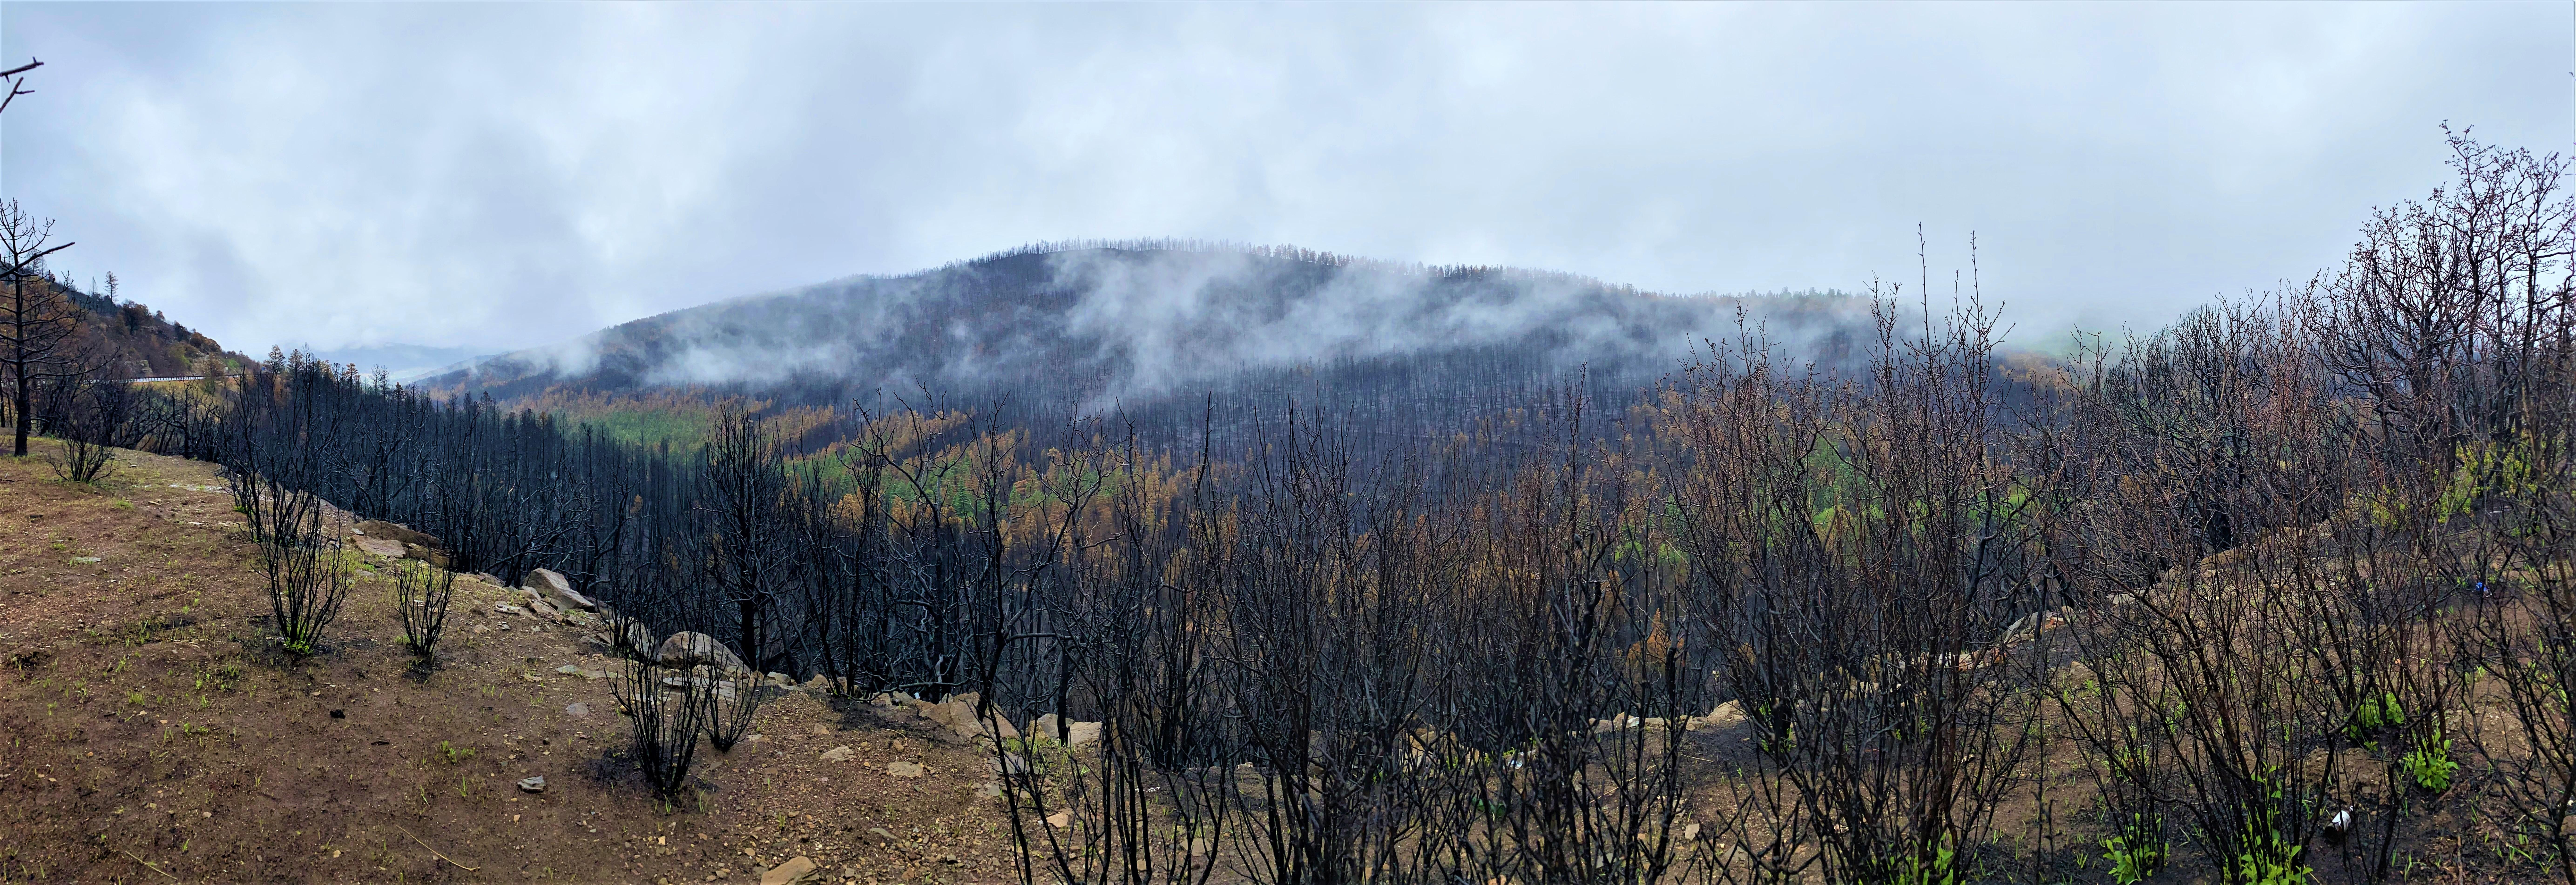 Overcast with mountain in background two hillsides mosaic burn